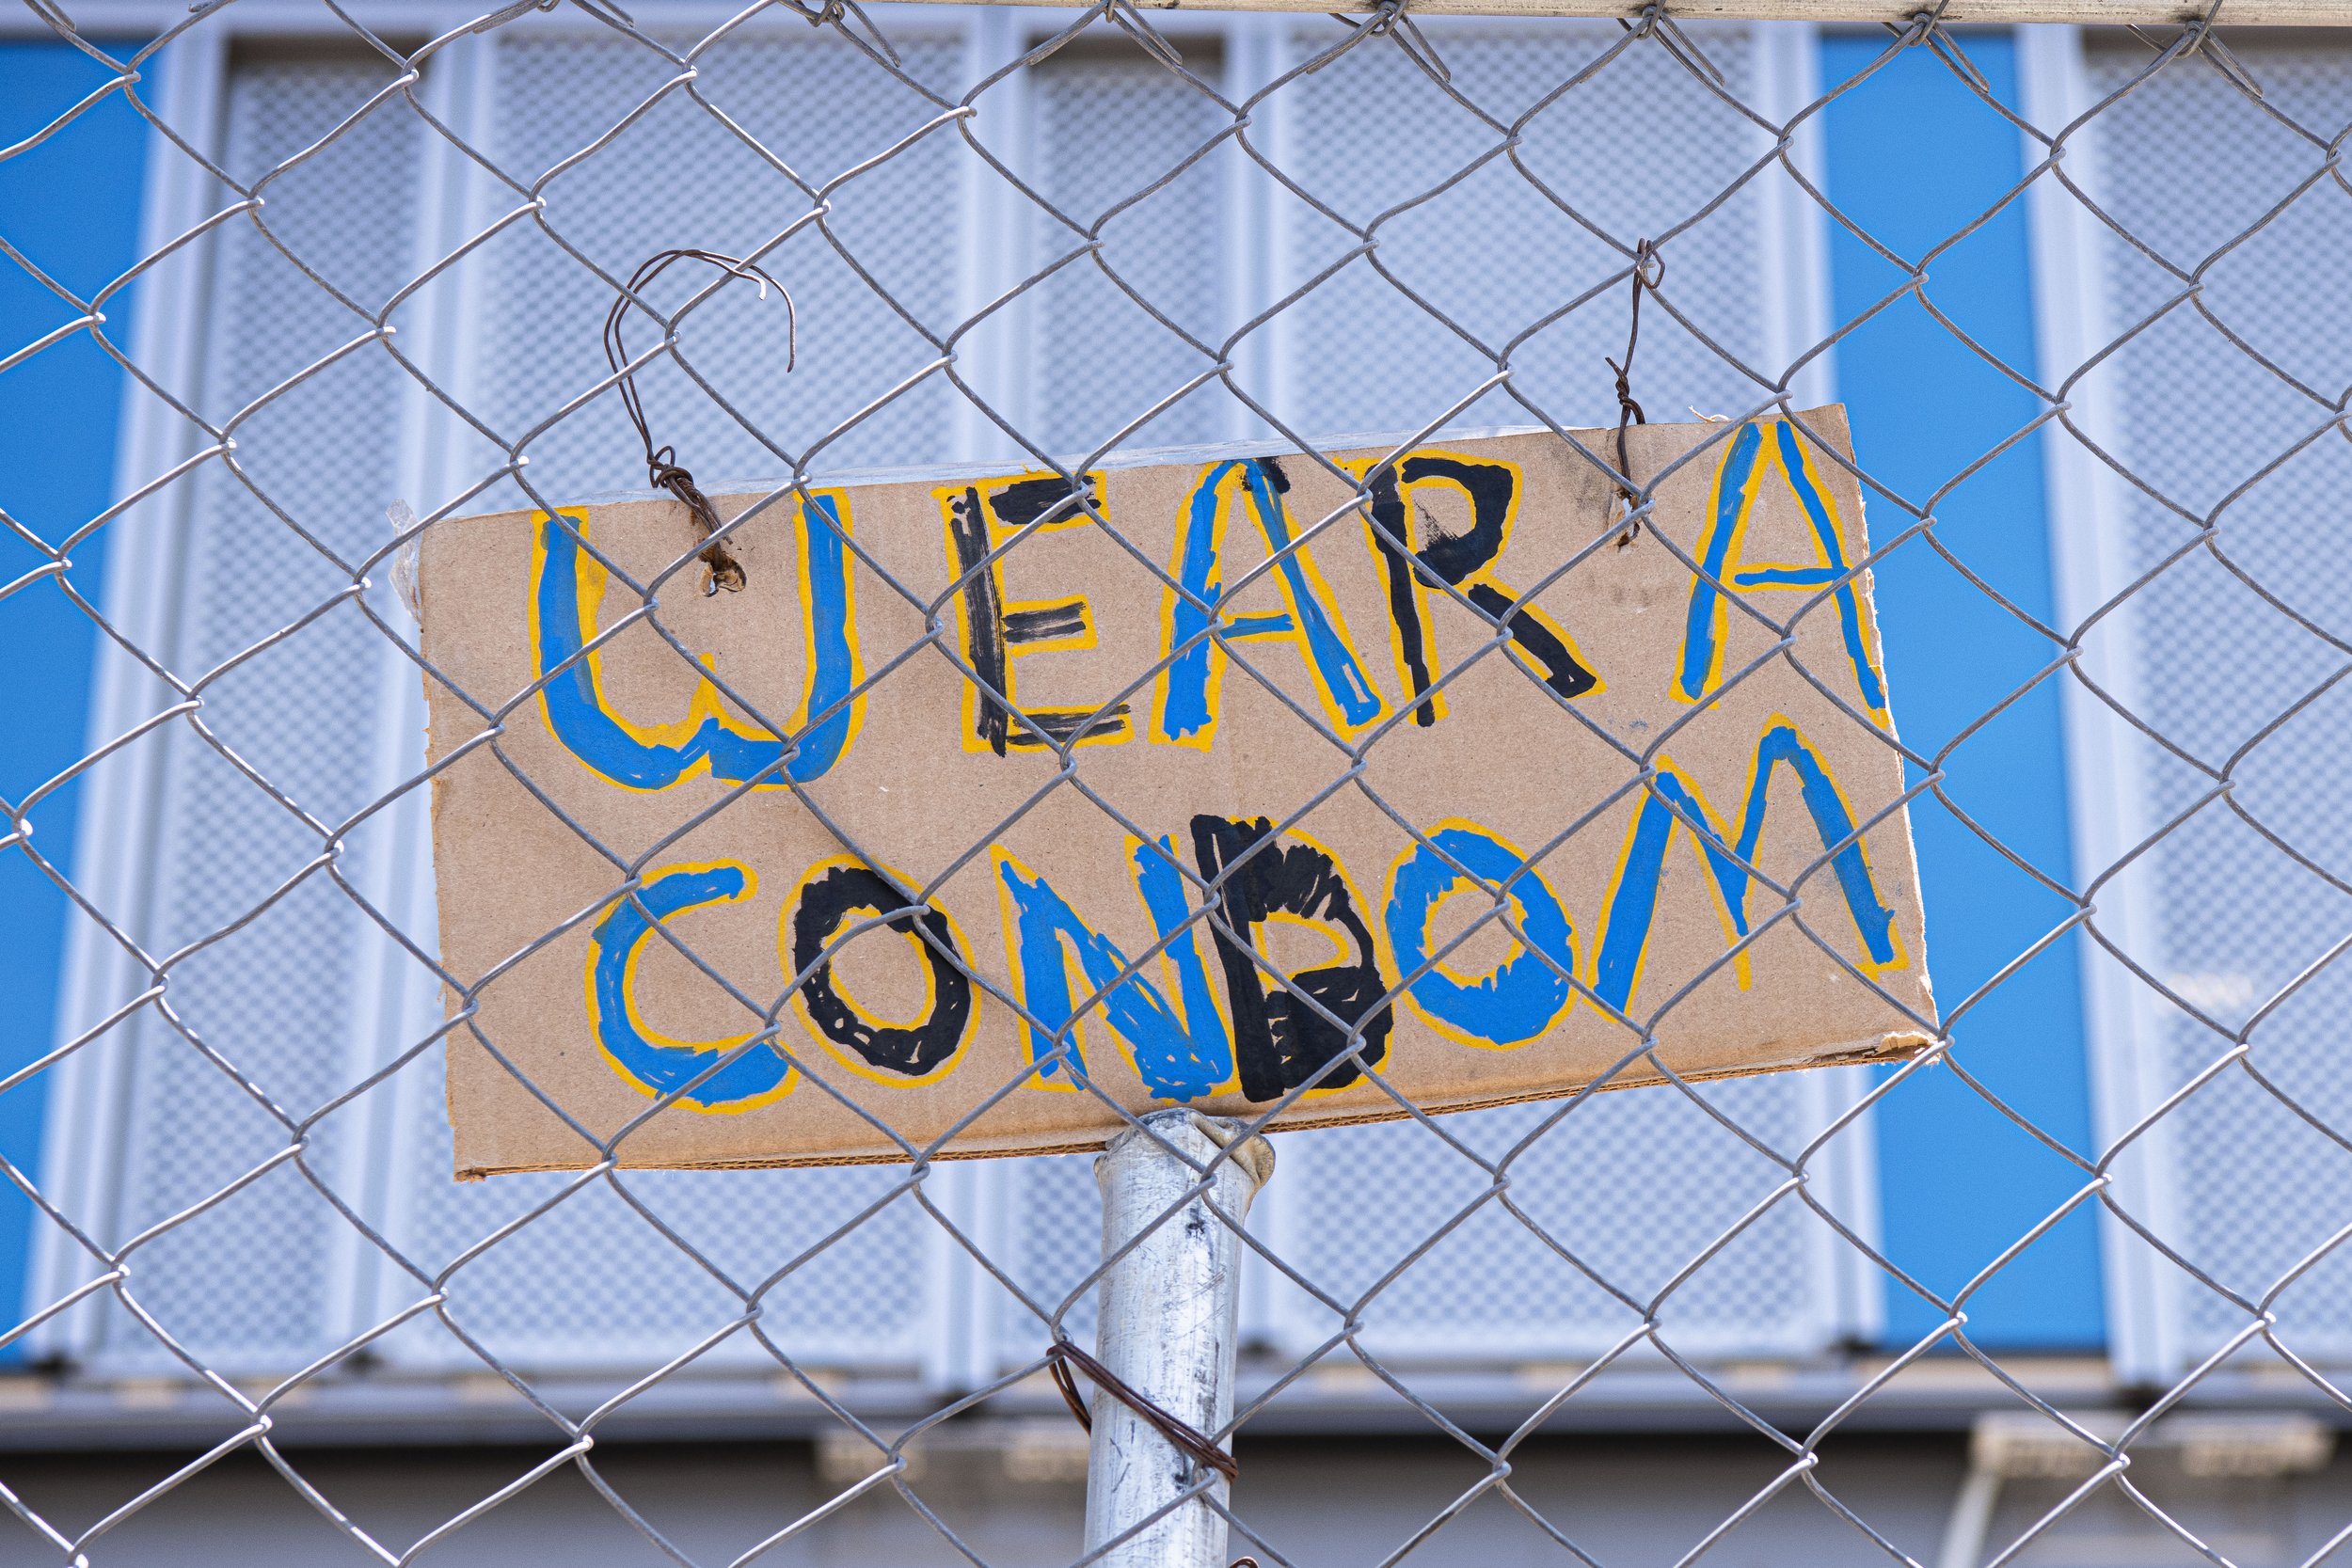  Construction workers from a nearby construction site place a sign for the Abortion members protesting outside of the 9th Annual Summit of Americas. (Jon Putman | The Corsair) 